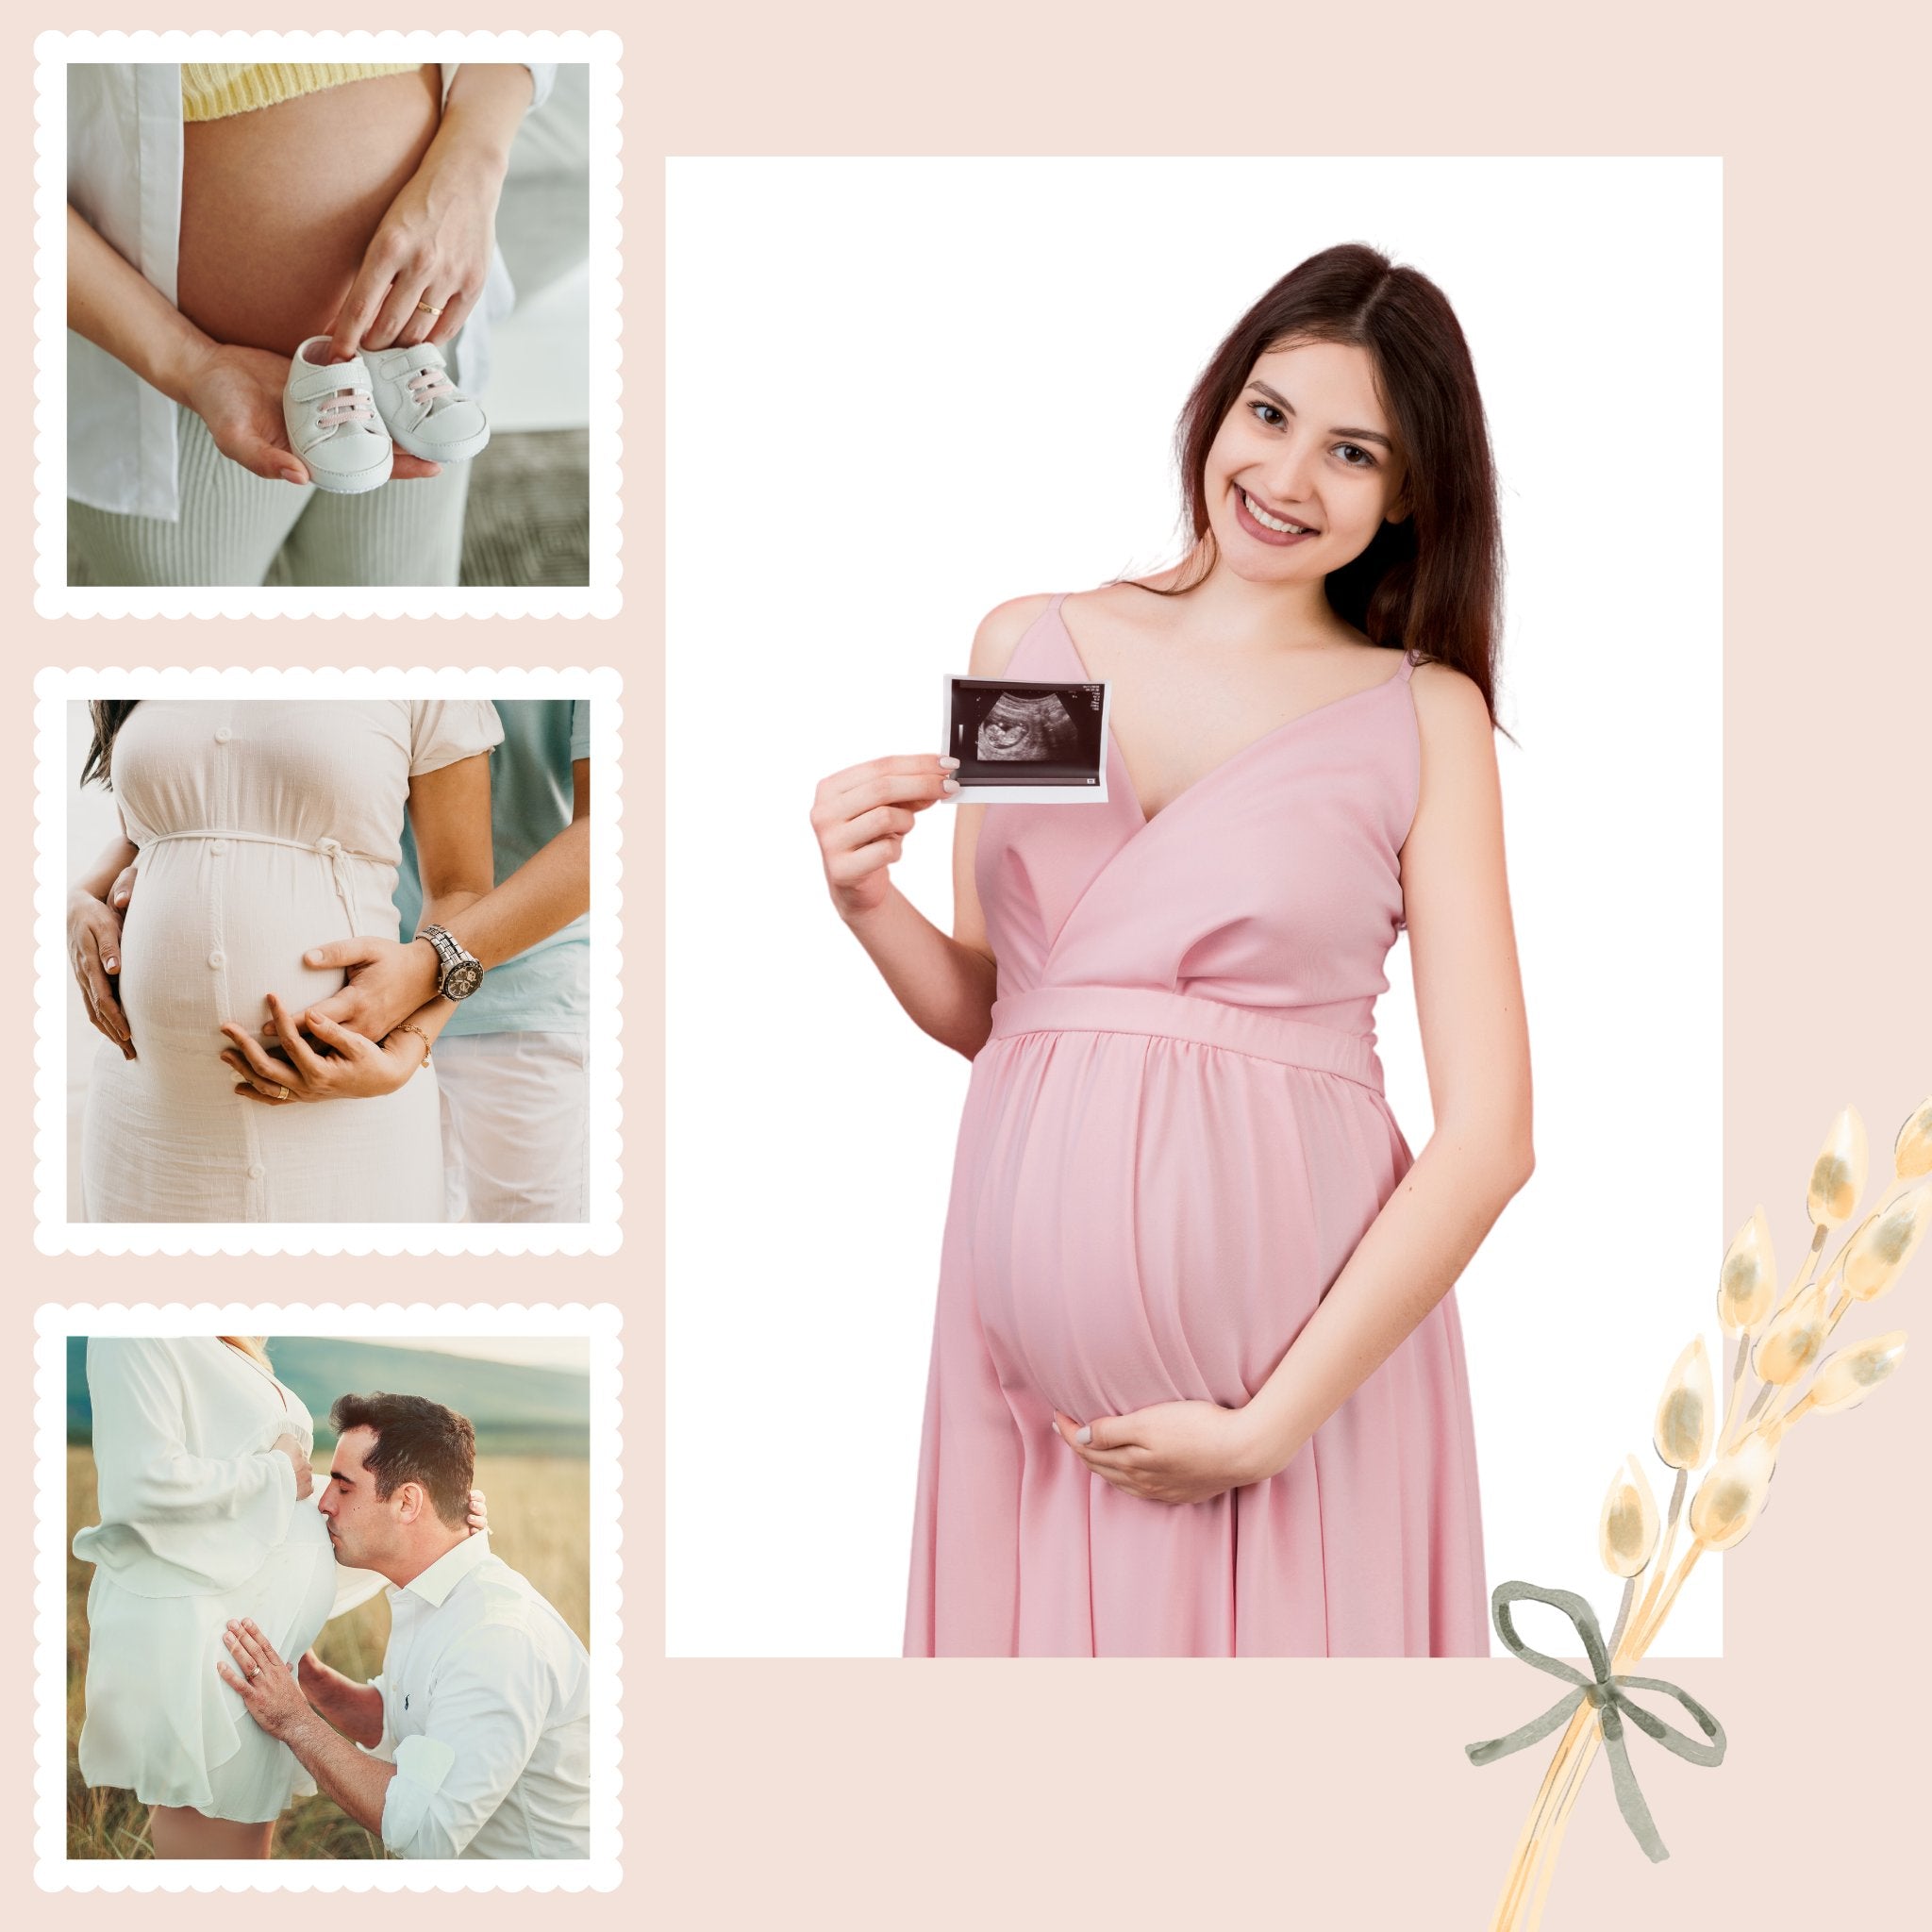 Pregnancy Care and Gifts